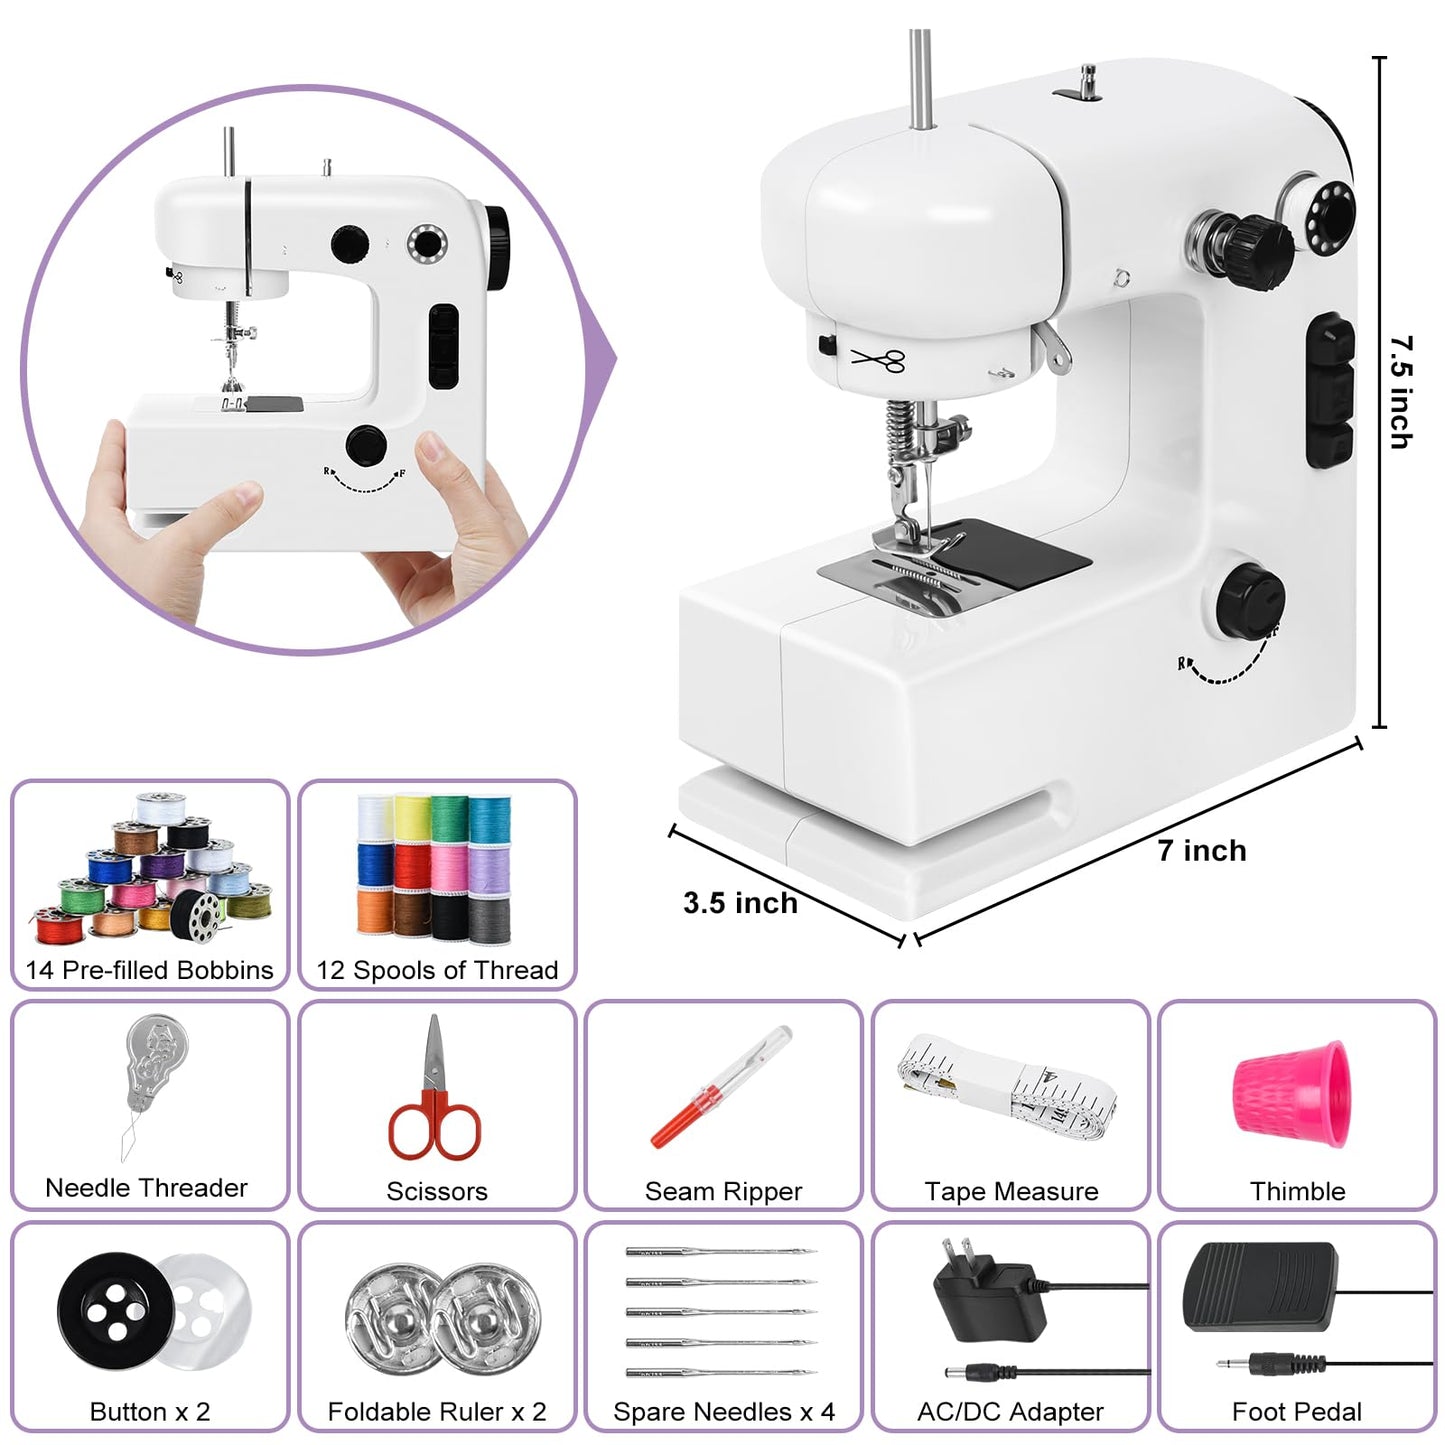 Weaver III：Make Dreams Come True, Sewing Machine for Beginners, Sewing Machine Kits, with Lights, Foot Pedals, 2 Power Modes, Reverse knob